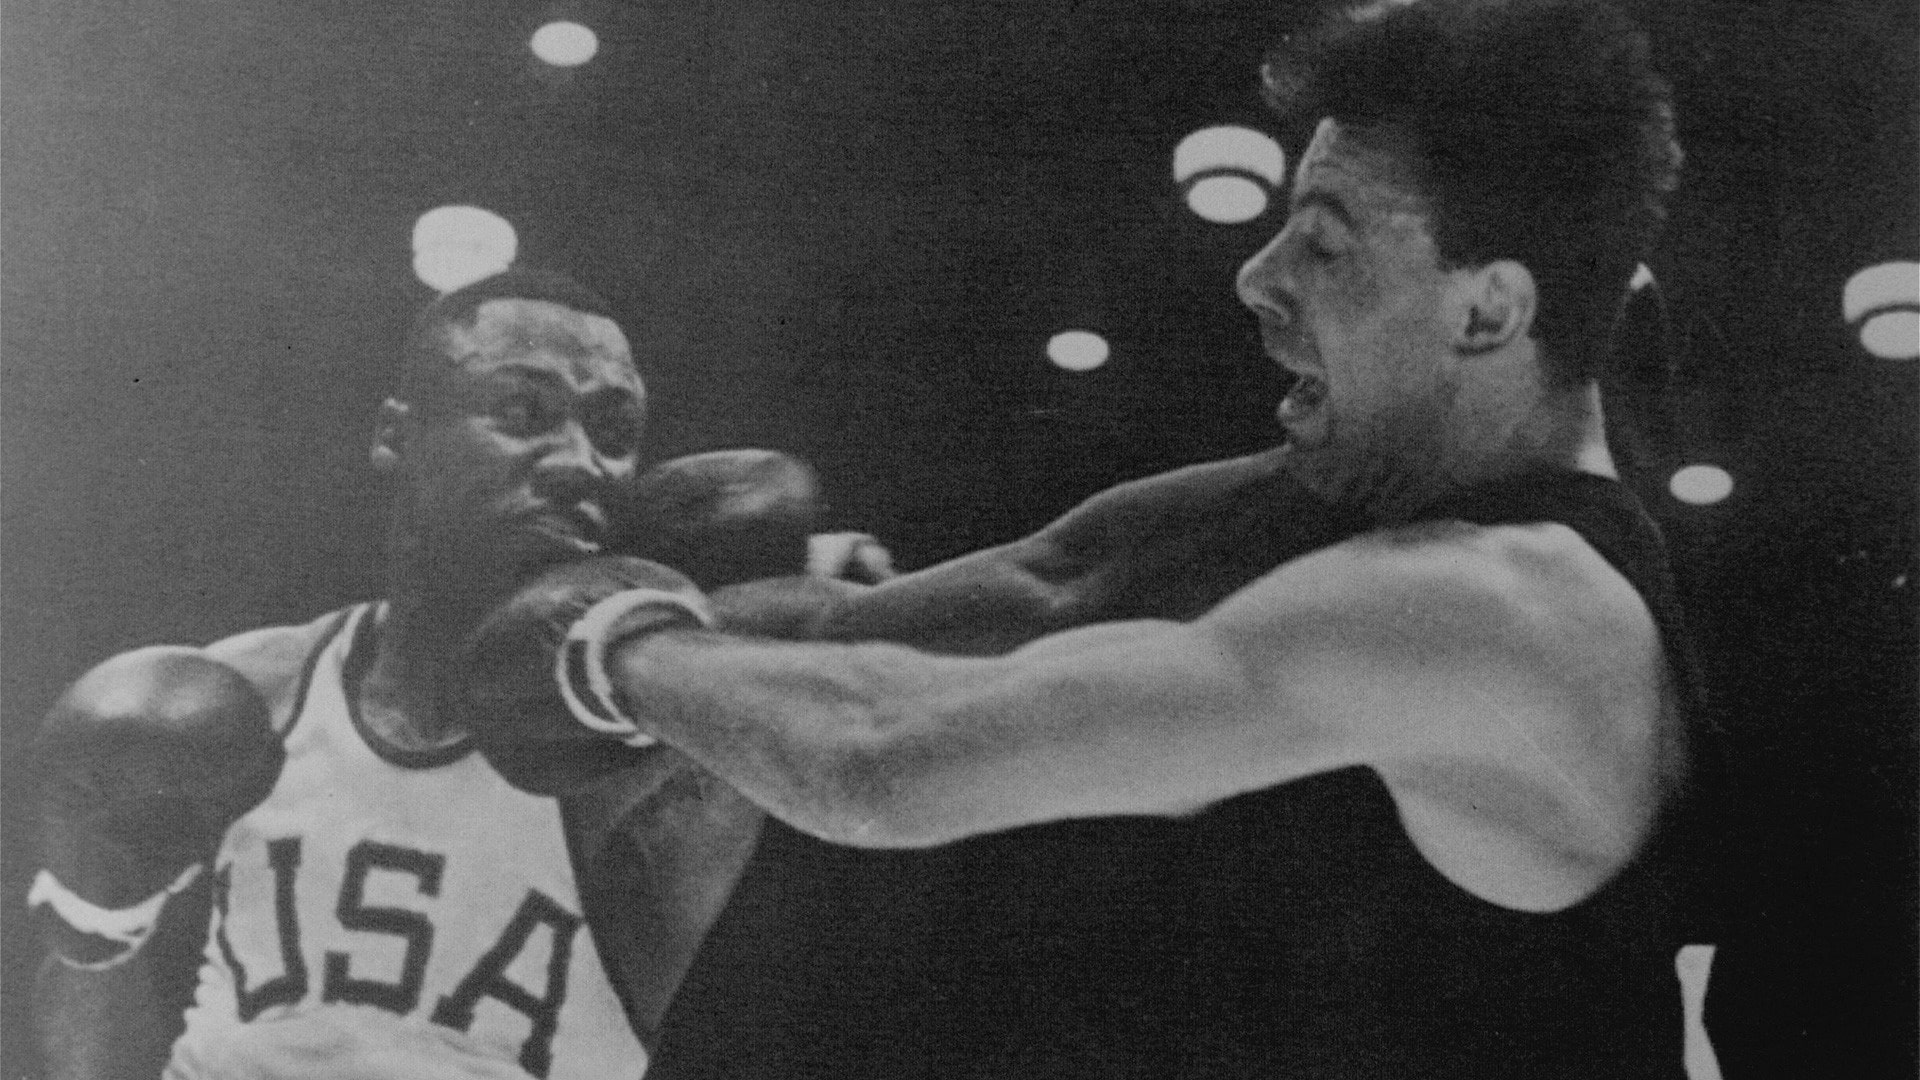 Joe Frazier is punching with his left fish and has his right arm cocked and ready to punch German Hans Huber in the gold-medal bout.